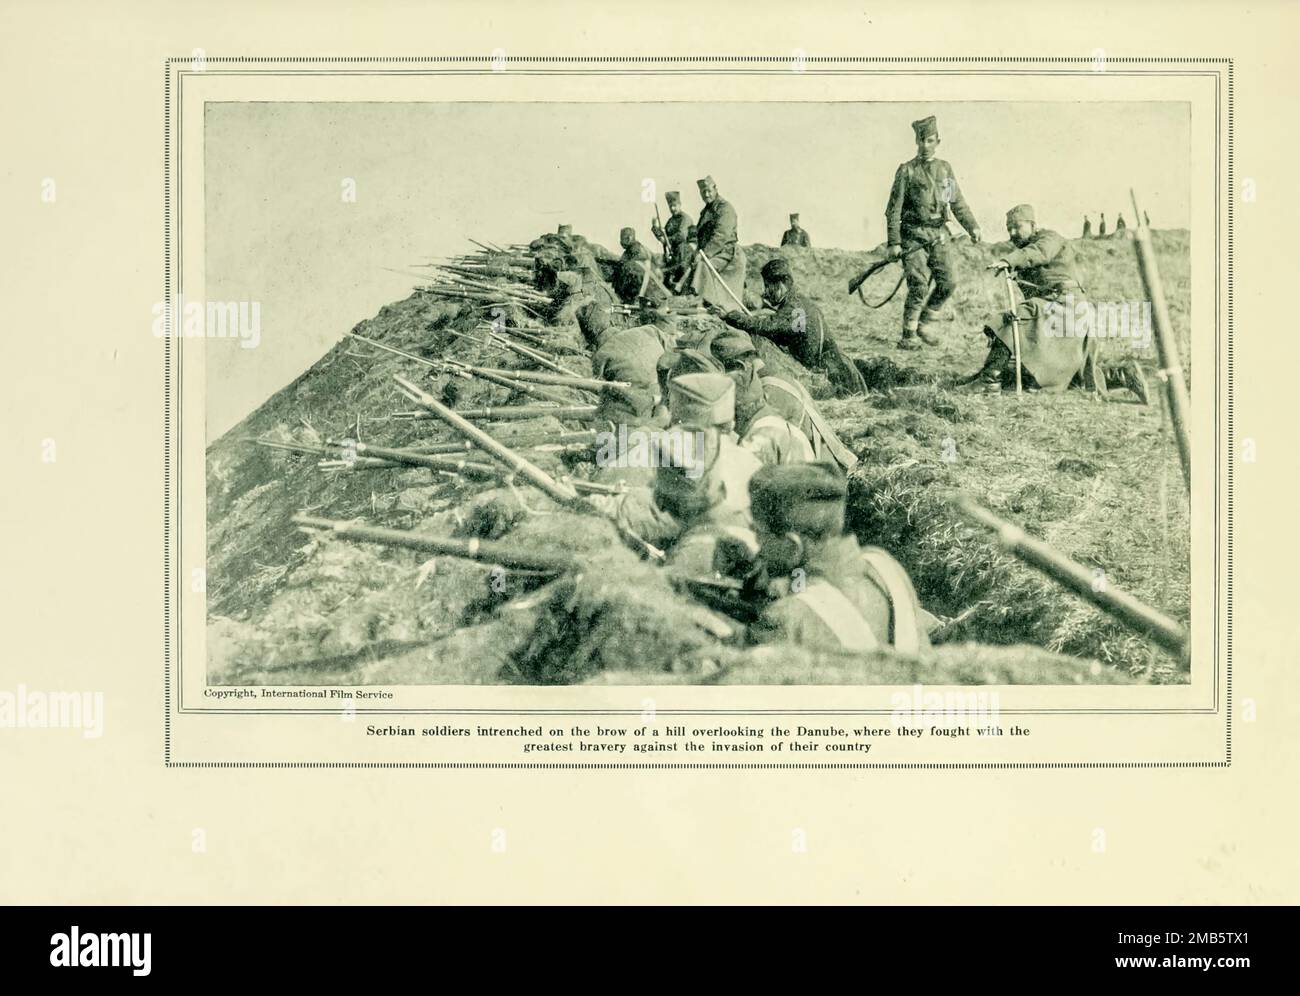 Serbian Soldiers Intrenched on a Hill near the Danube from the book The story of the great war; the complete historical records of events to date DIPLOMATIC AND STATE PAPERS by Reynolds, Francis Joseph, 1867-1937; Churchill, Allen Leon; Miller, Francis Trevelyan, 1877-1959; Wood, Leonard, 1860-1927; Knight, Austin Melvin, 1854-1927; Palmer, Frederick, 1873-1958; Simonds, Frank Herbert, 1878-; Ruhl, Arthur Brown, 1876-  Volume VII Published 1920 Stock Photo